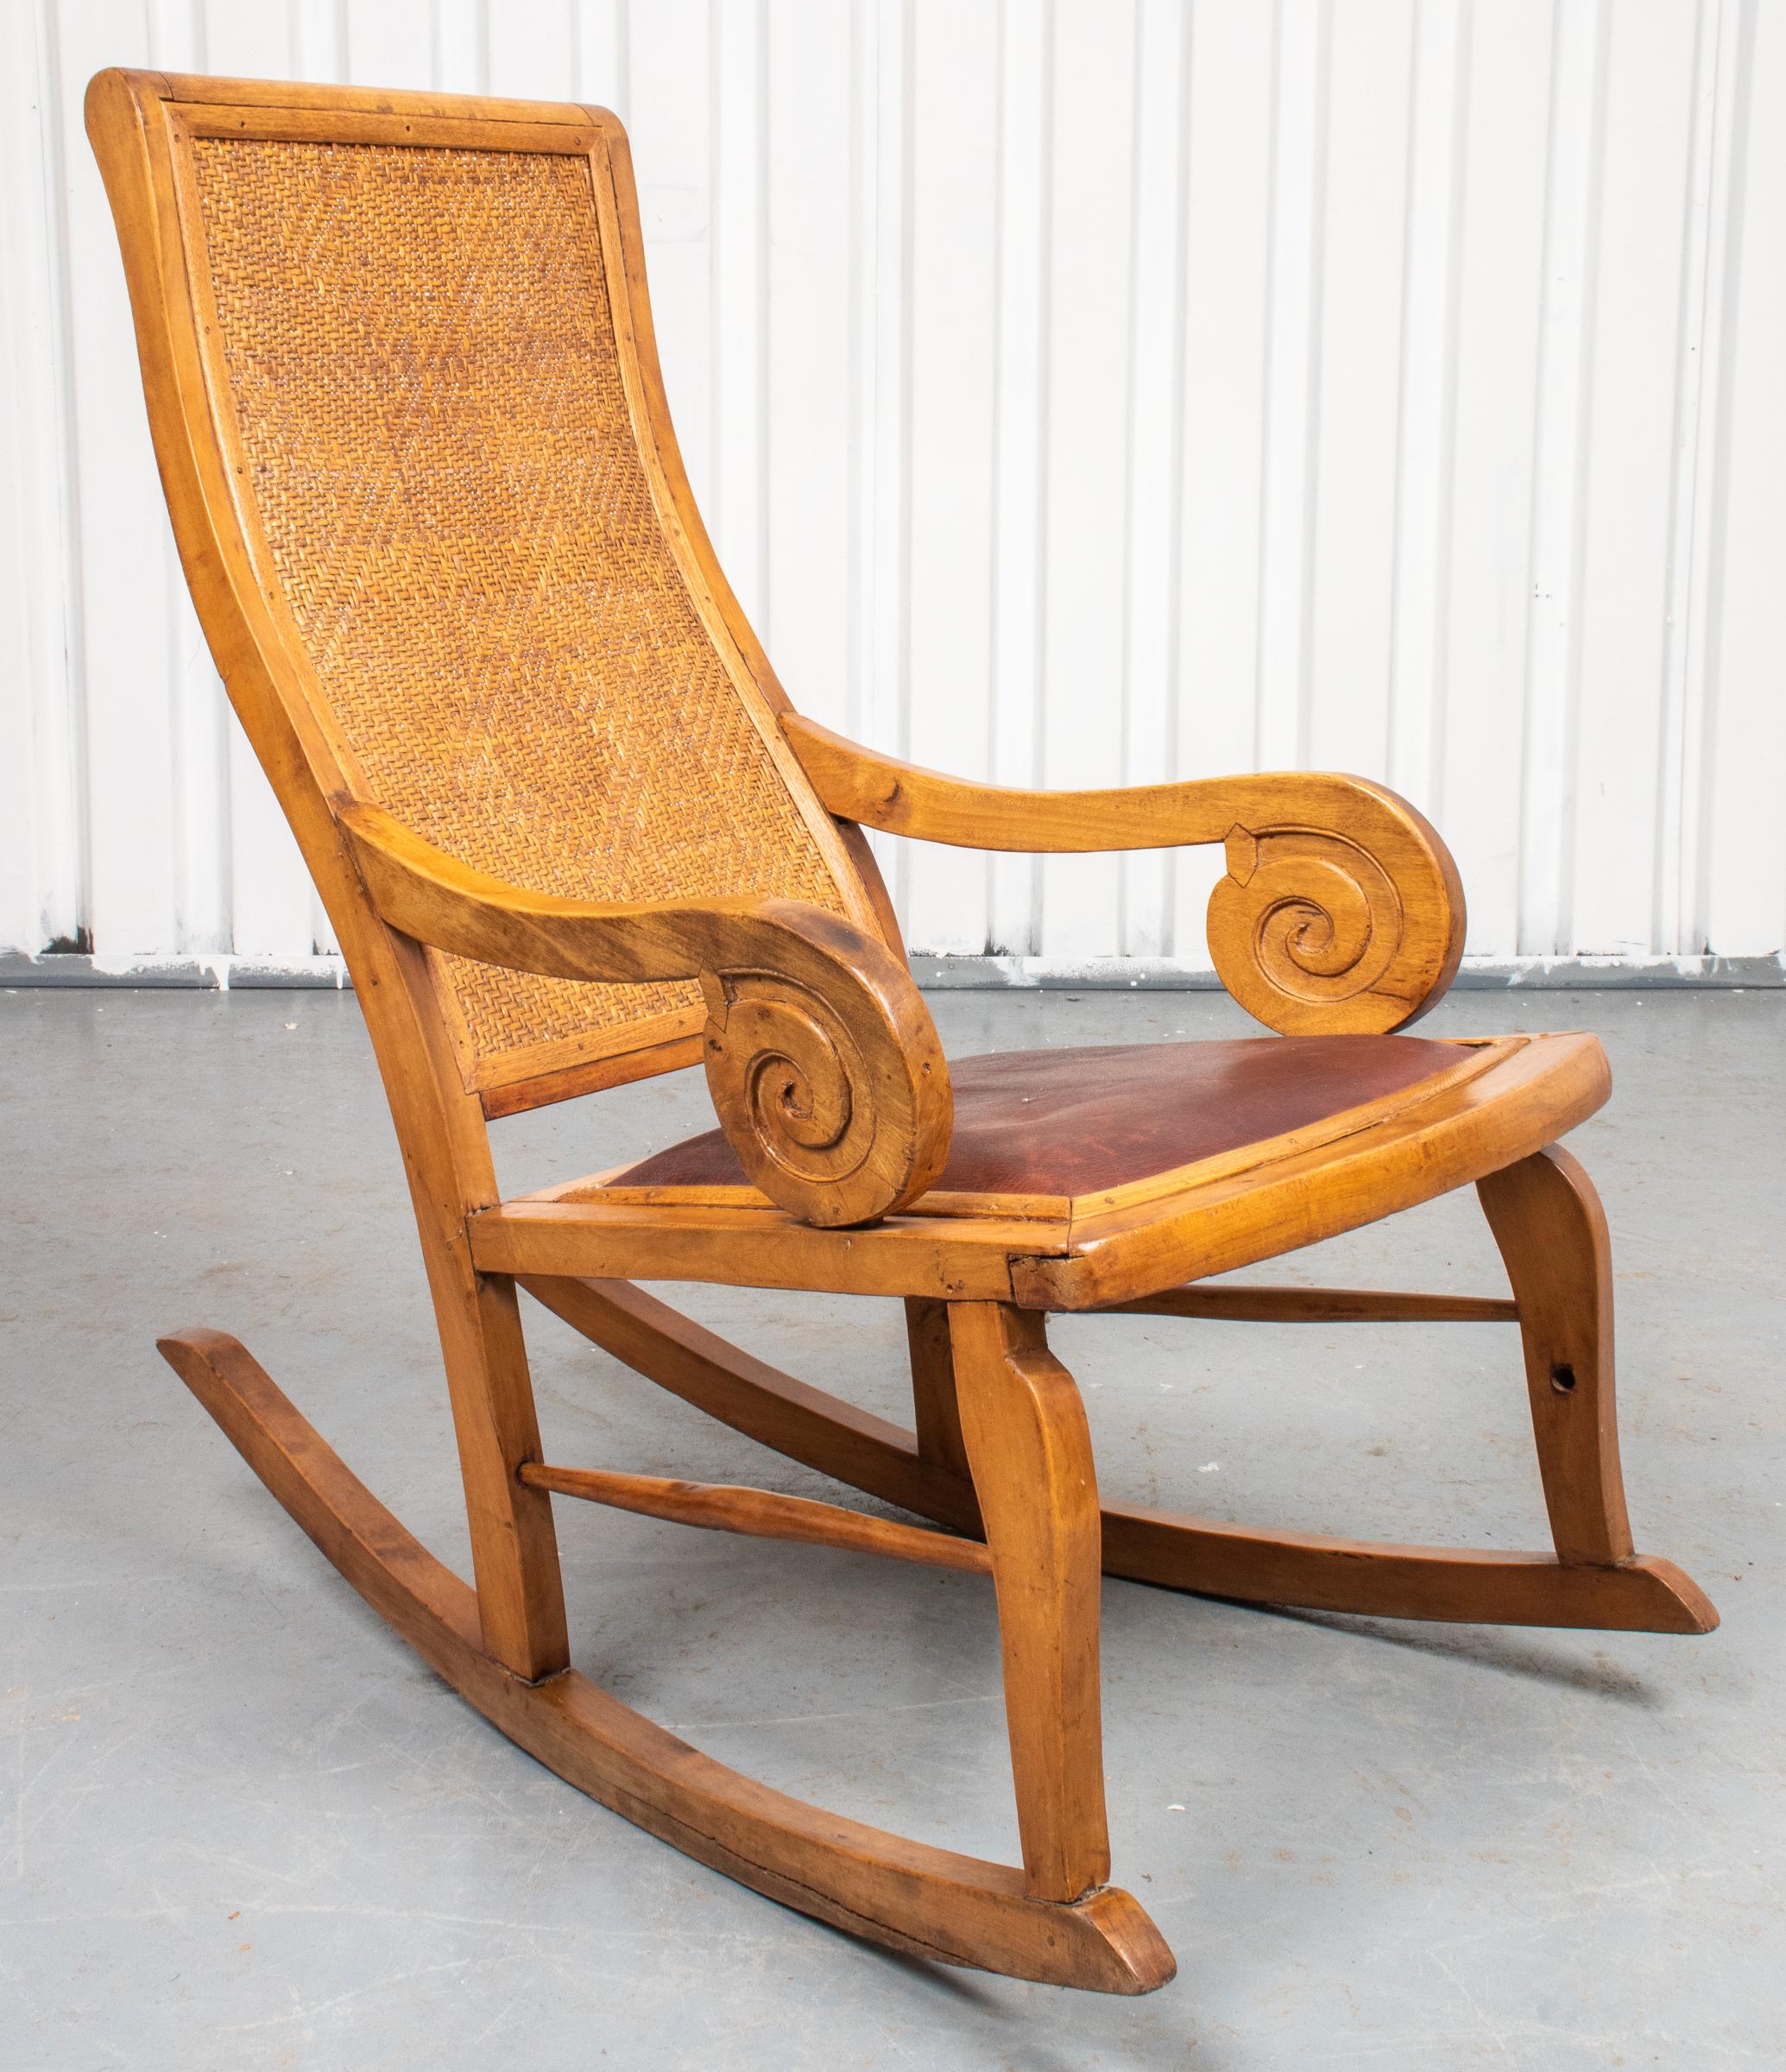 Indonesian Teak plantation rocking chair with leather seat. 37” H x 22” W x 40.5” D x Seat 19